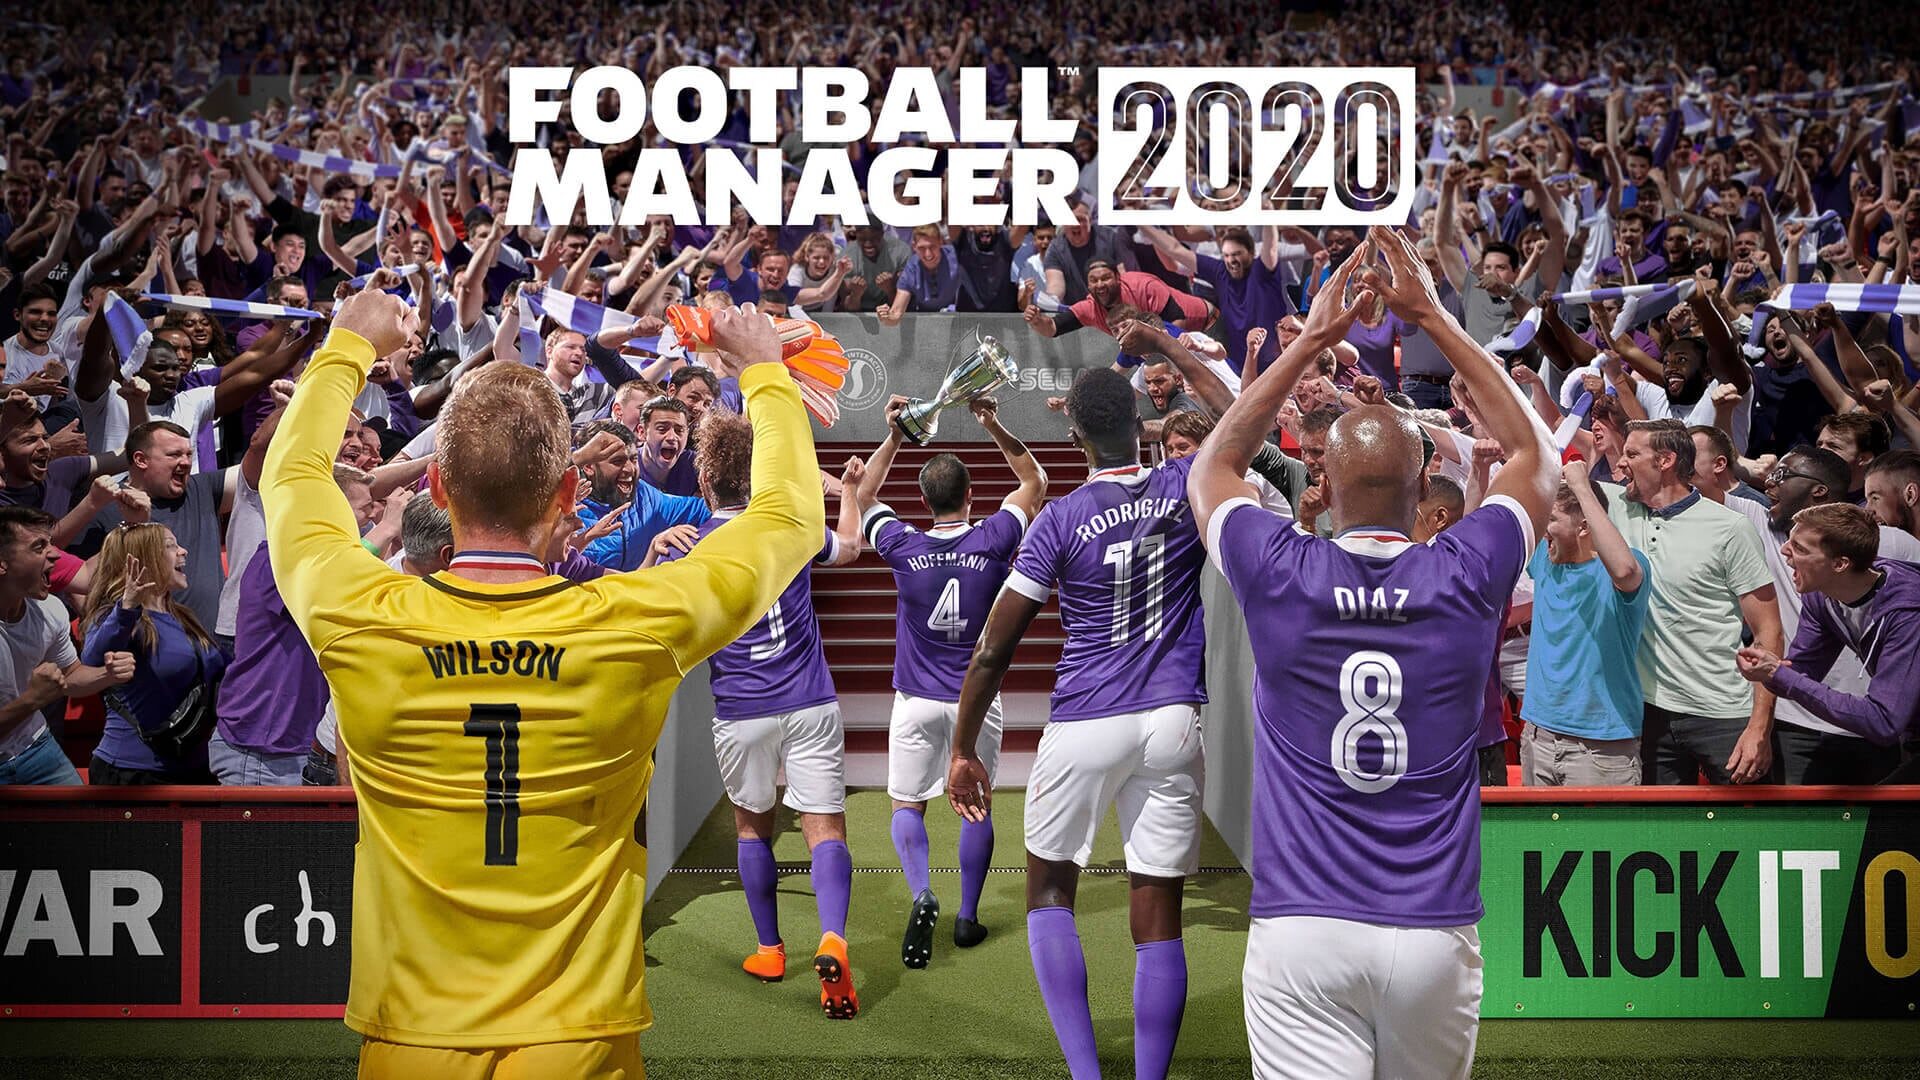 Football Manager 2020 completely free.  A huge surprise for football fans